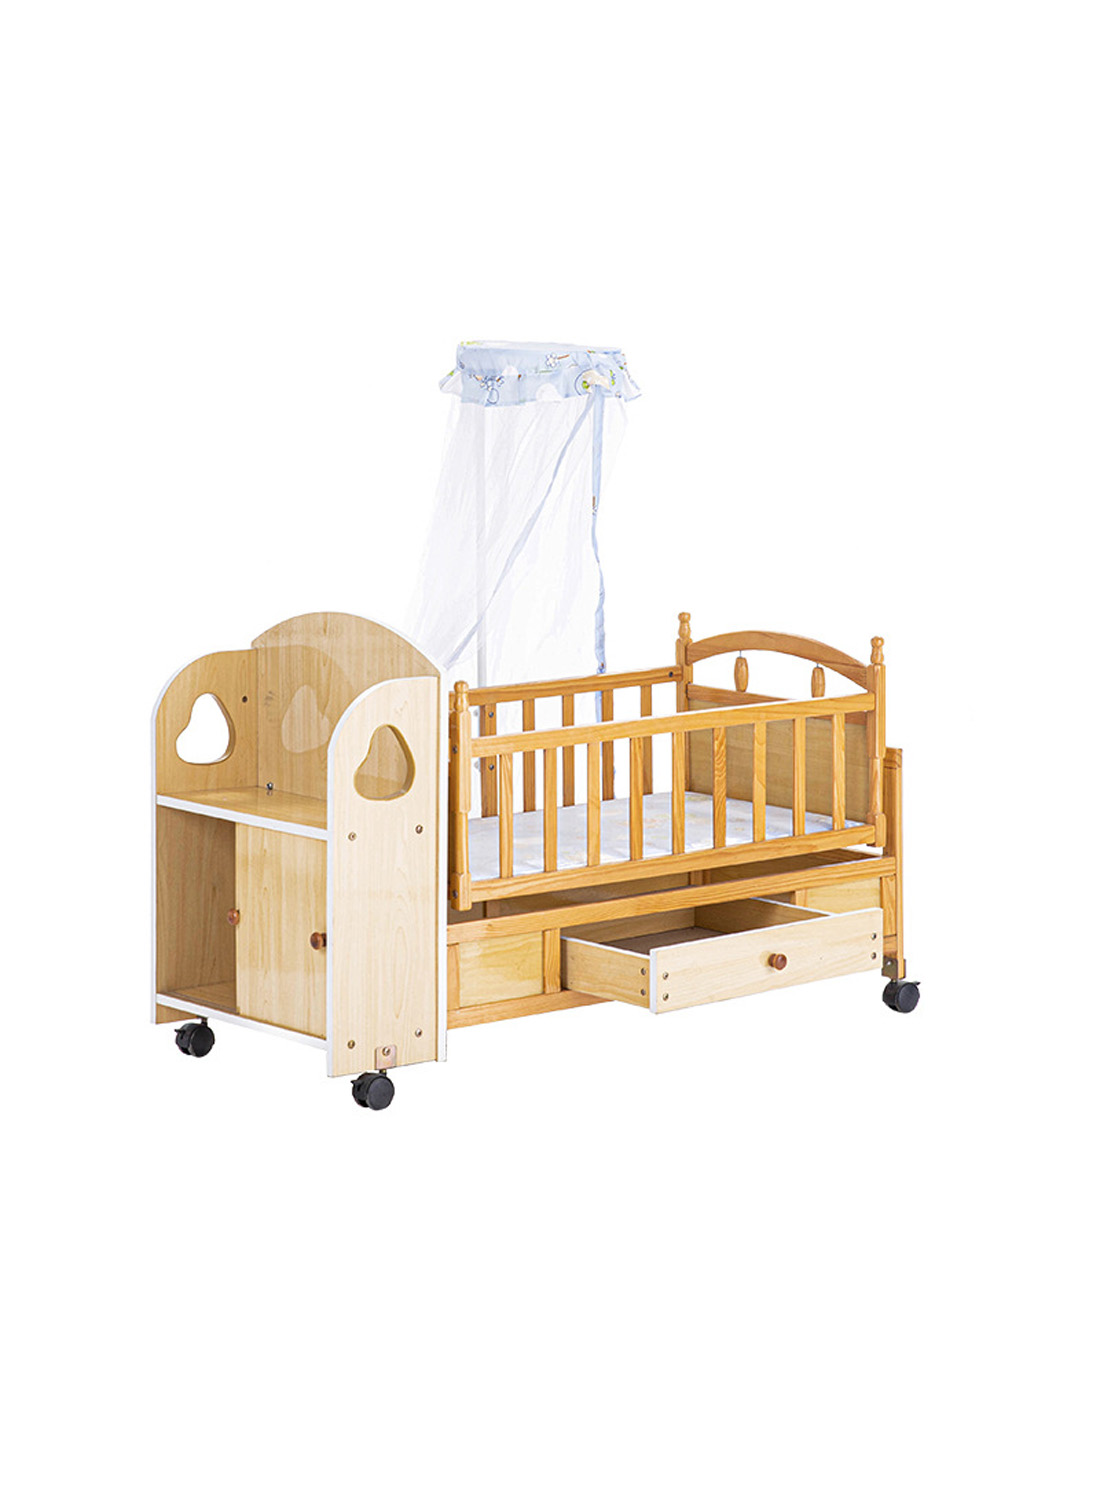 Factory Source Kindergarten Solid Wood Bed Wholesale Wider Thickened Pine Wood Children's Bed Nap Sleep Stacking Bed Crib